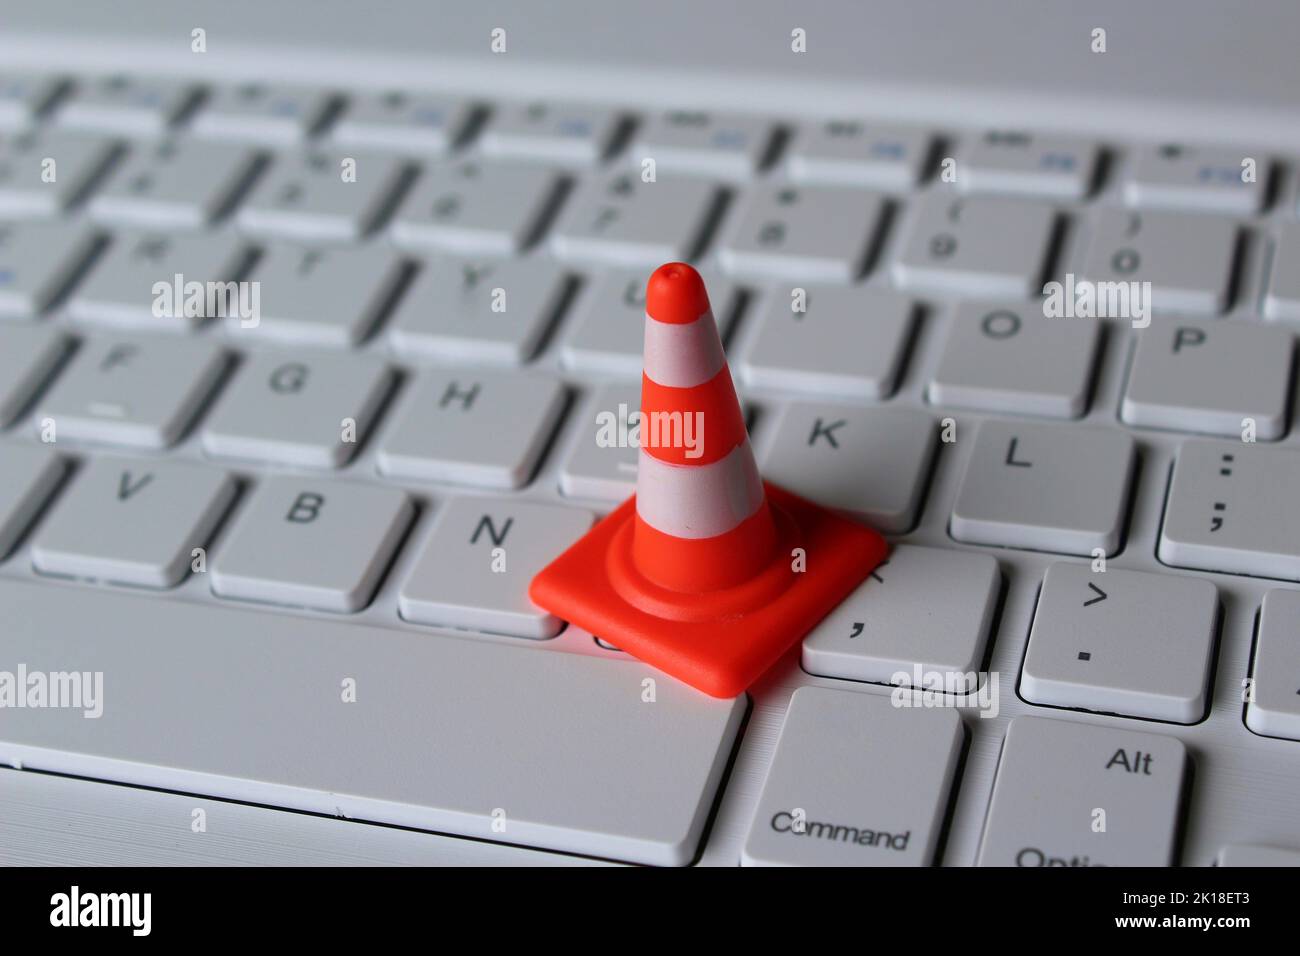 Computer system under construction, maintenance, repair concept. Safety cone and keyboard computer Stock Photo